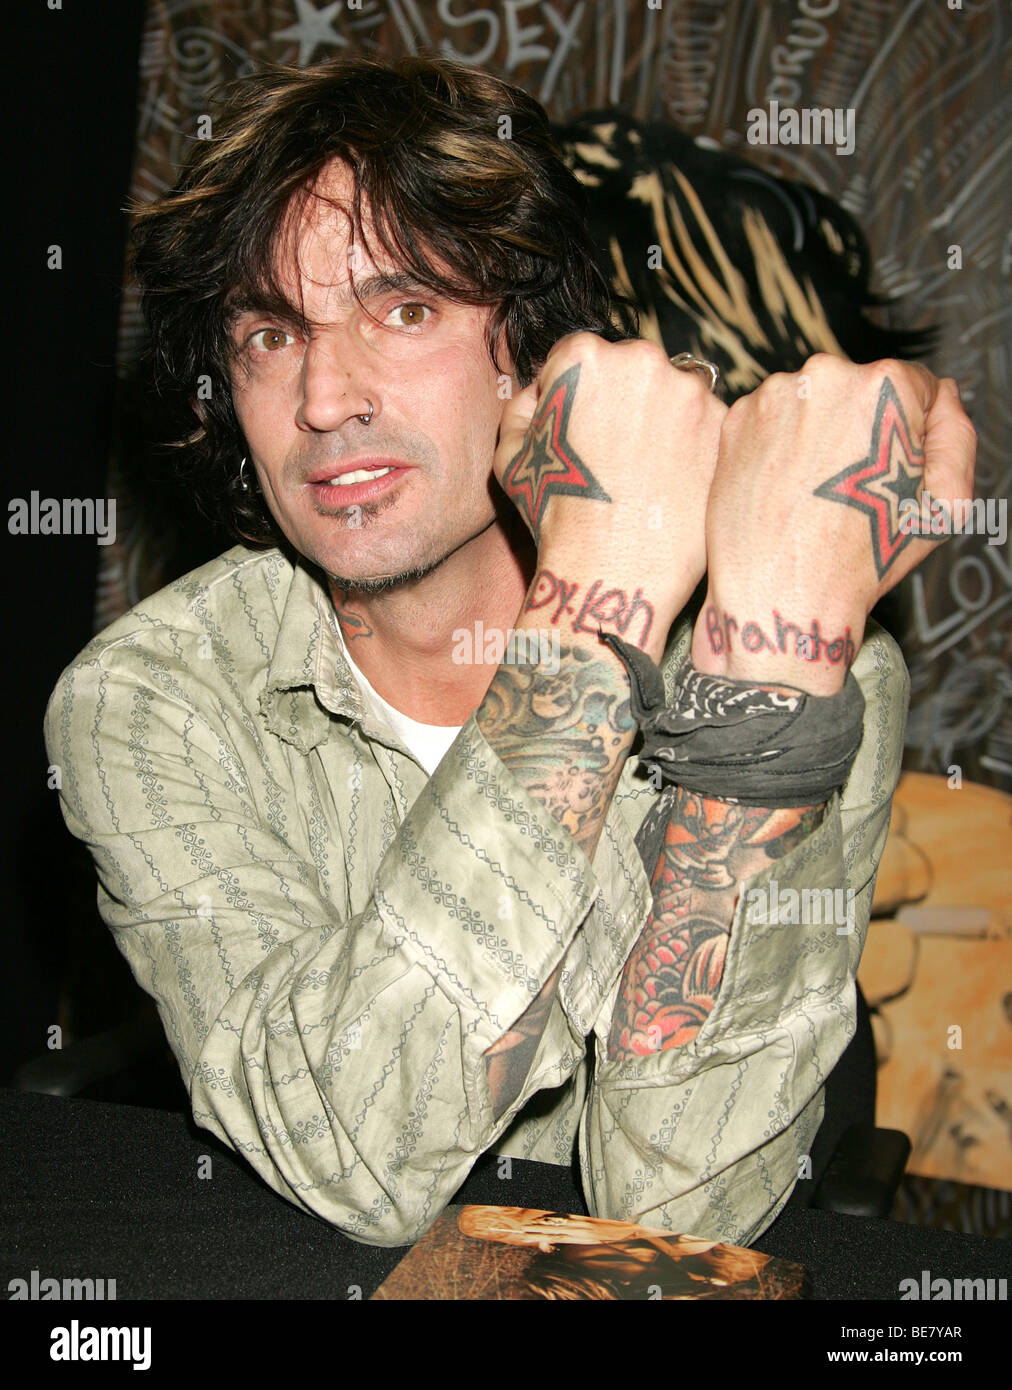 MOTLEY CRUE founder member of US rock group Tommy Lee Stock Photo Alamy